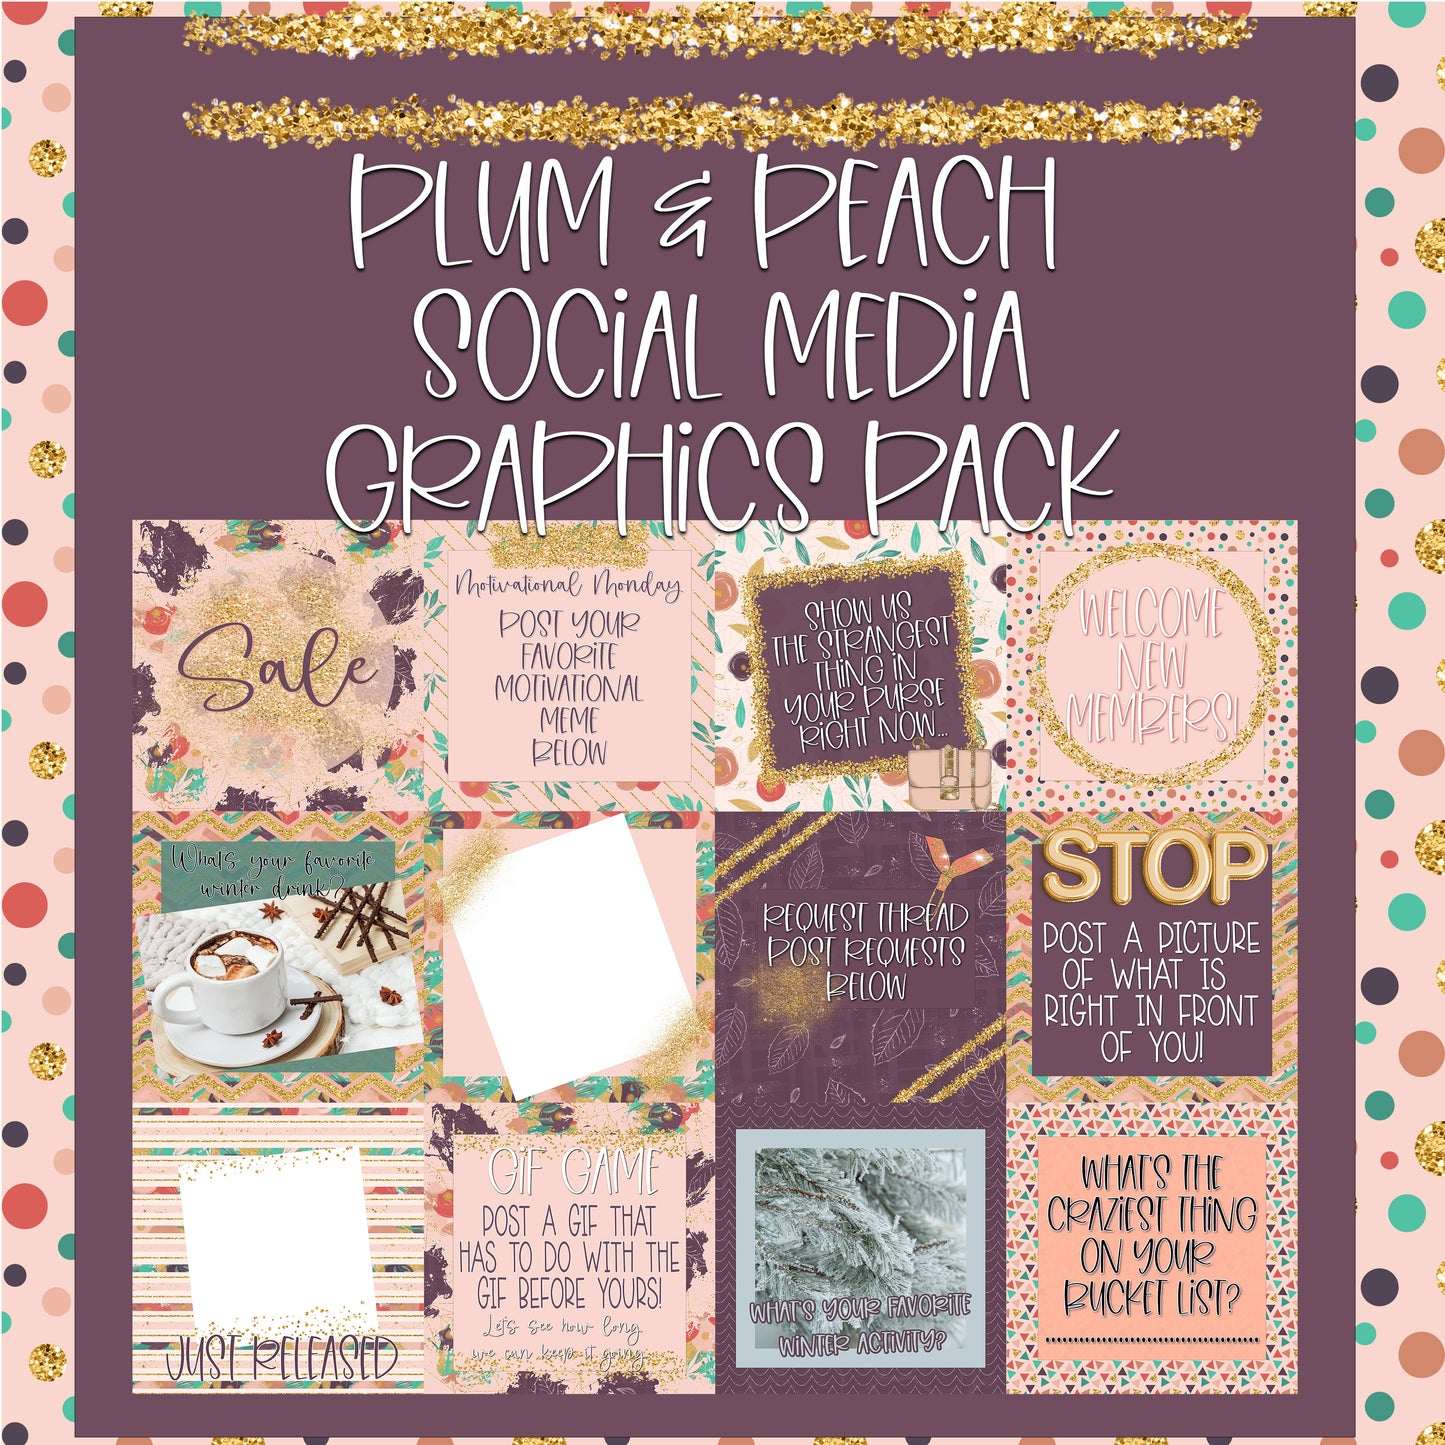 Plum and Peach Social Media Graphics Pack